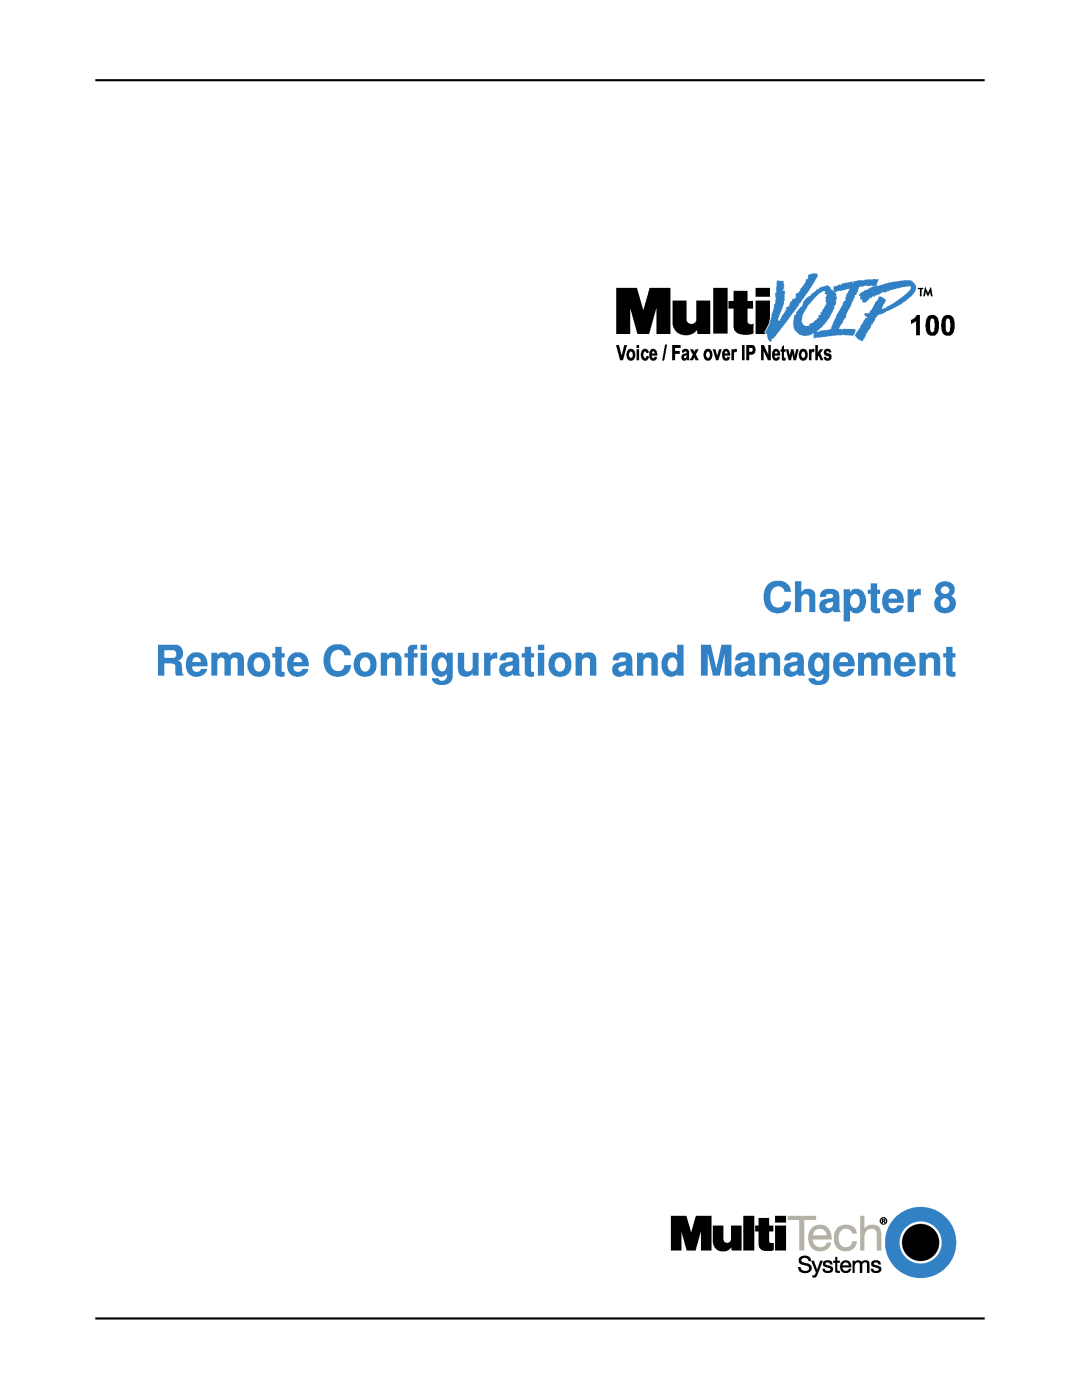 Multi-Tech Systems MVP120 manual Chapter Remote Configuration and Management, Voice / Fax over IP Networks 